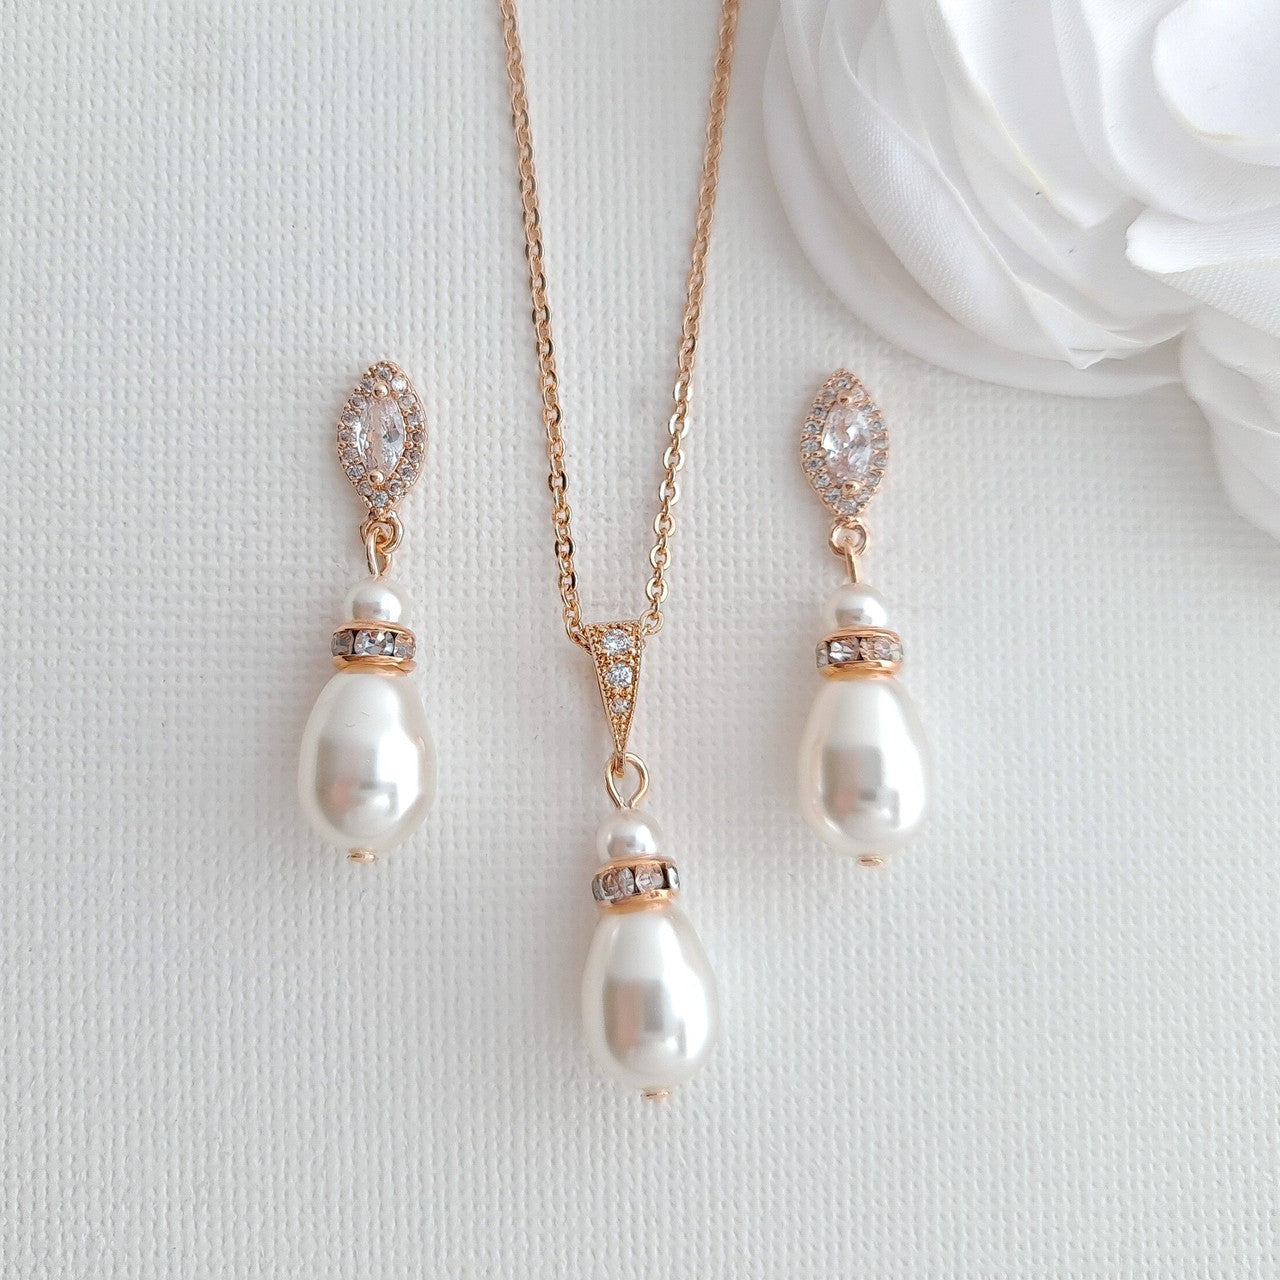 Pearl Jewellery Set with Teardrop Pearl Pendant and Earrings for Brides- Ella